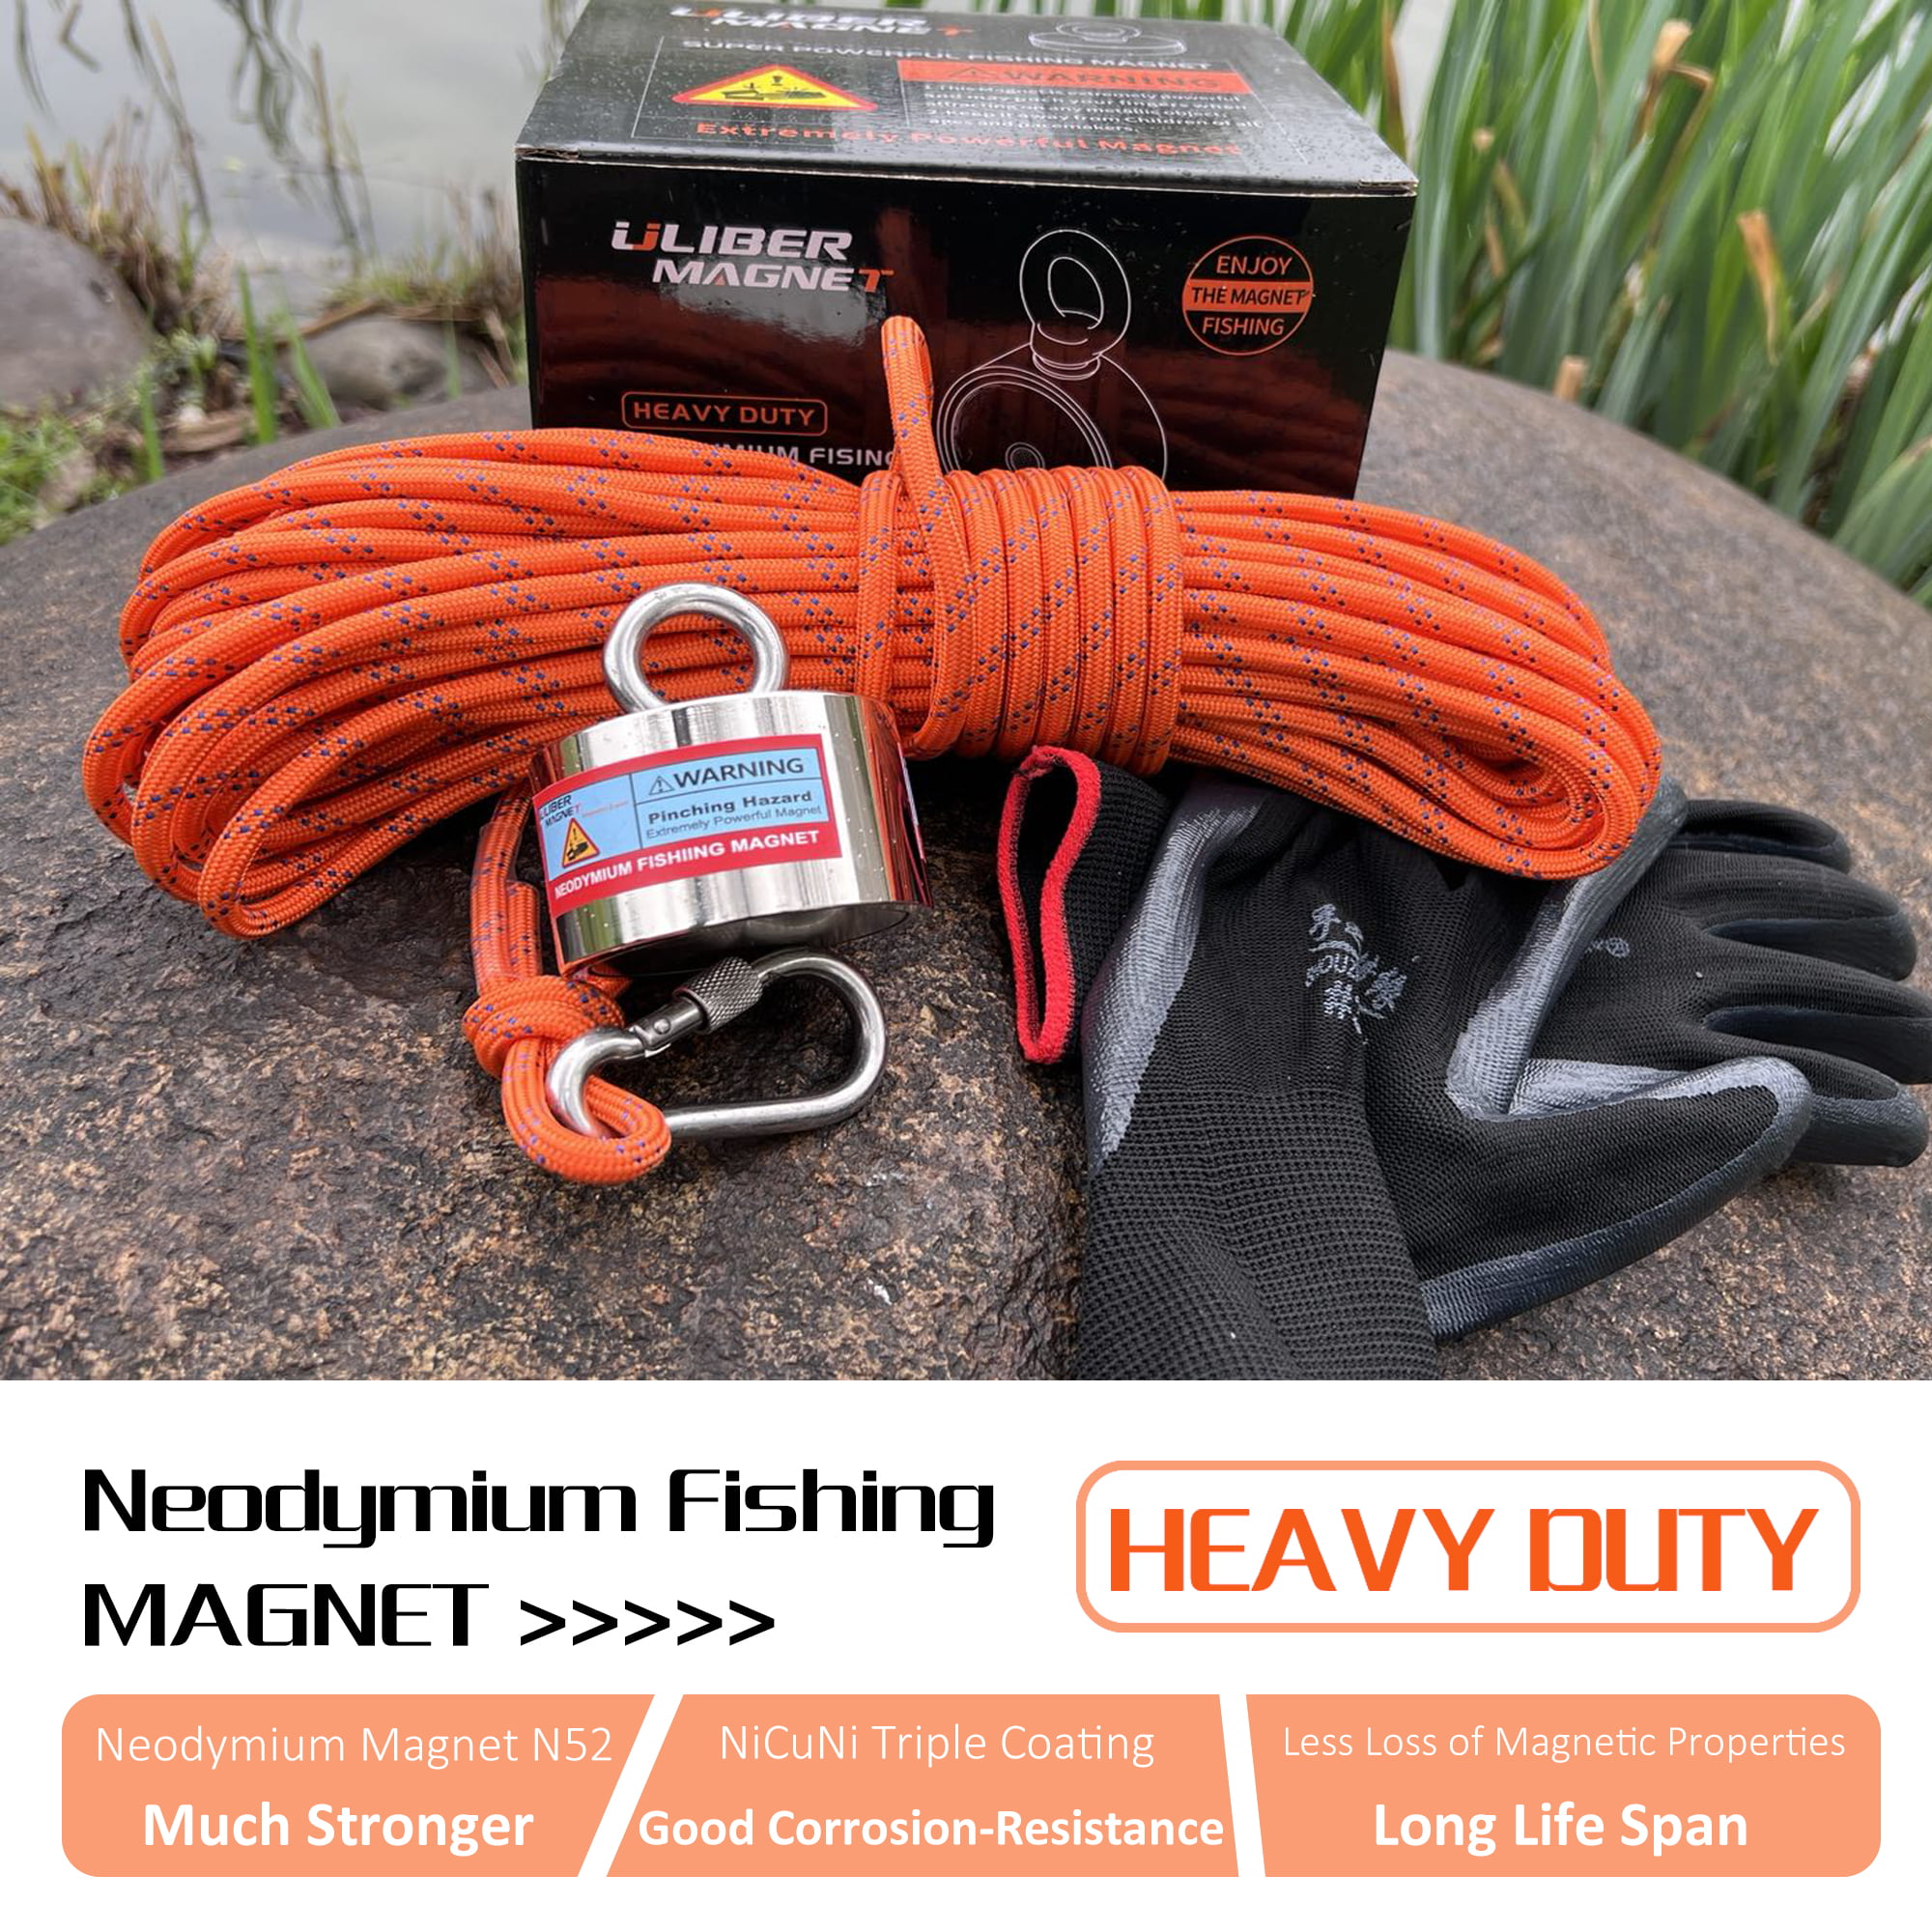 ULIBERMAGNET 400lbs Retrieval Magnets Pull Force, Grapping Hook,Strong  Fishing Magnet N52 Neodymium Magnets with 20m(66Feet) Durable Rope,Powerful